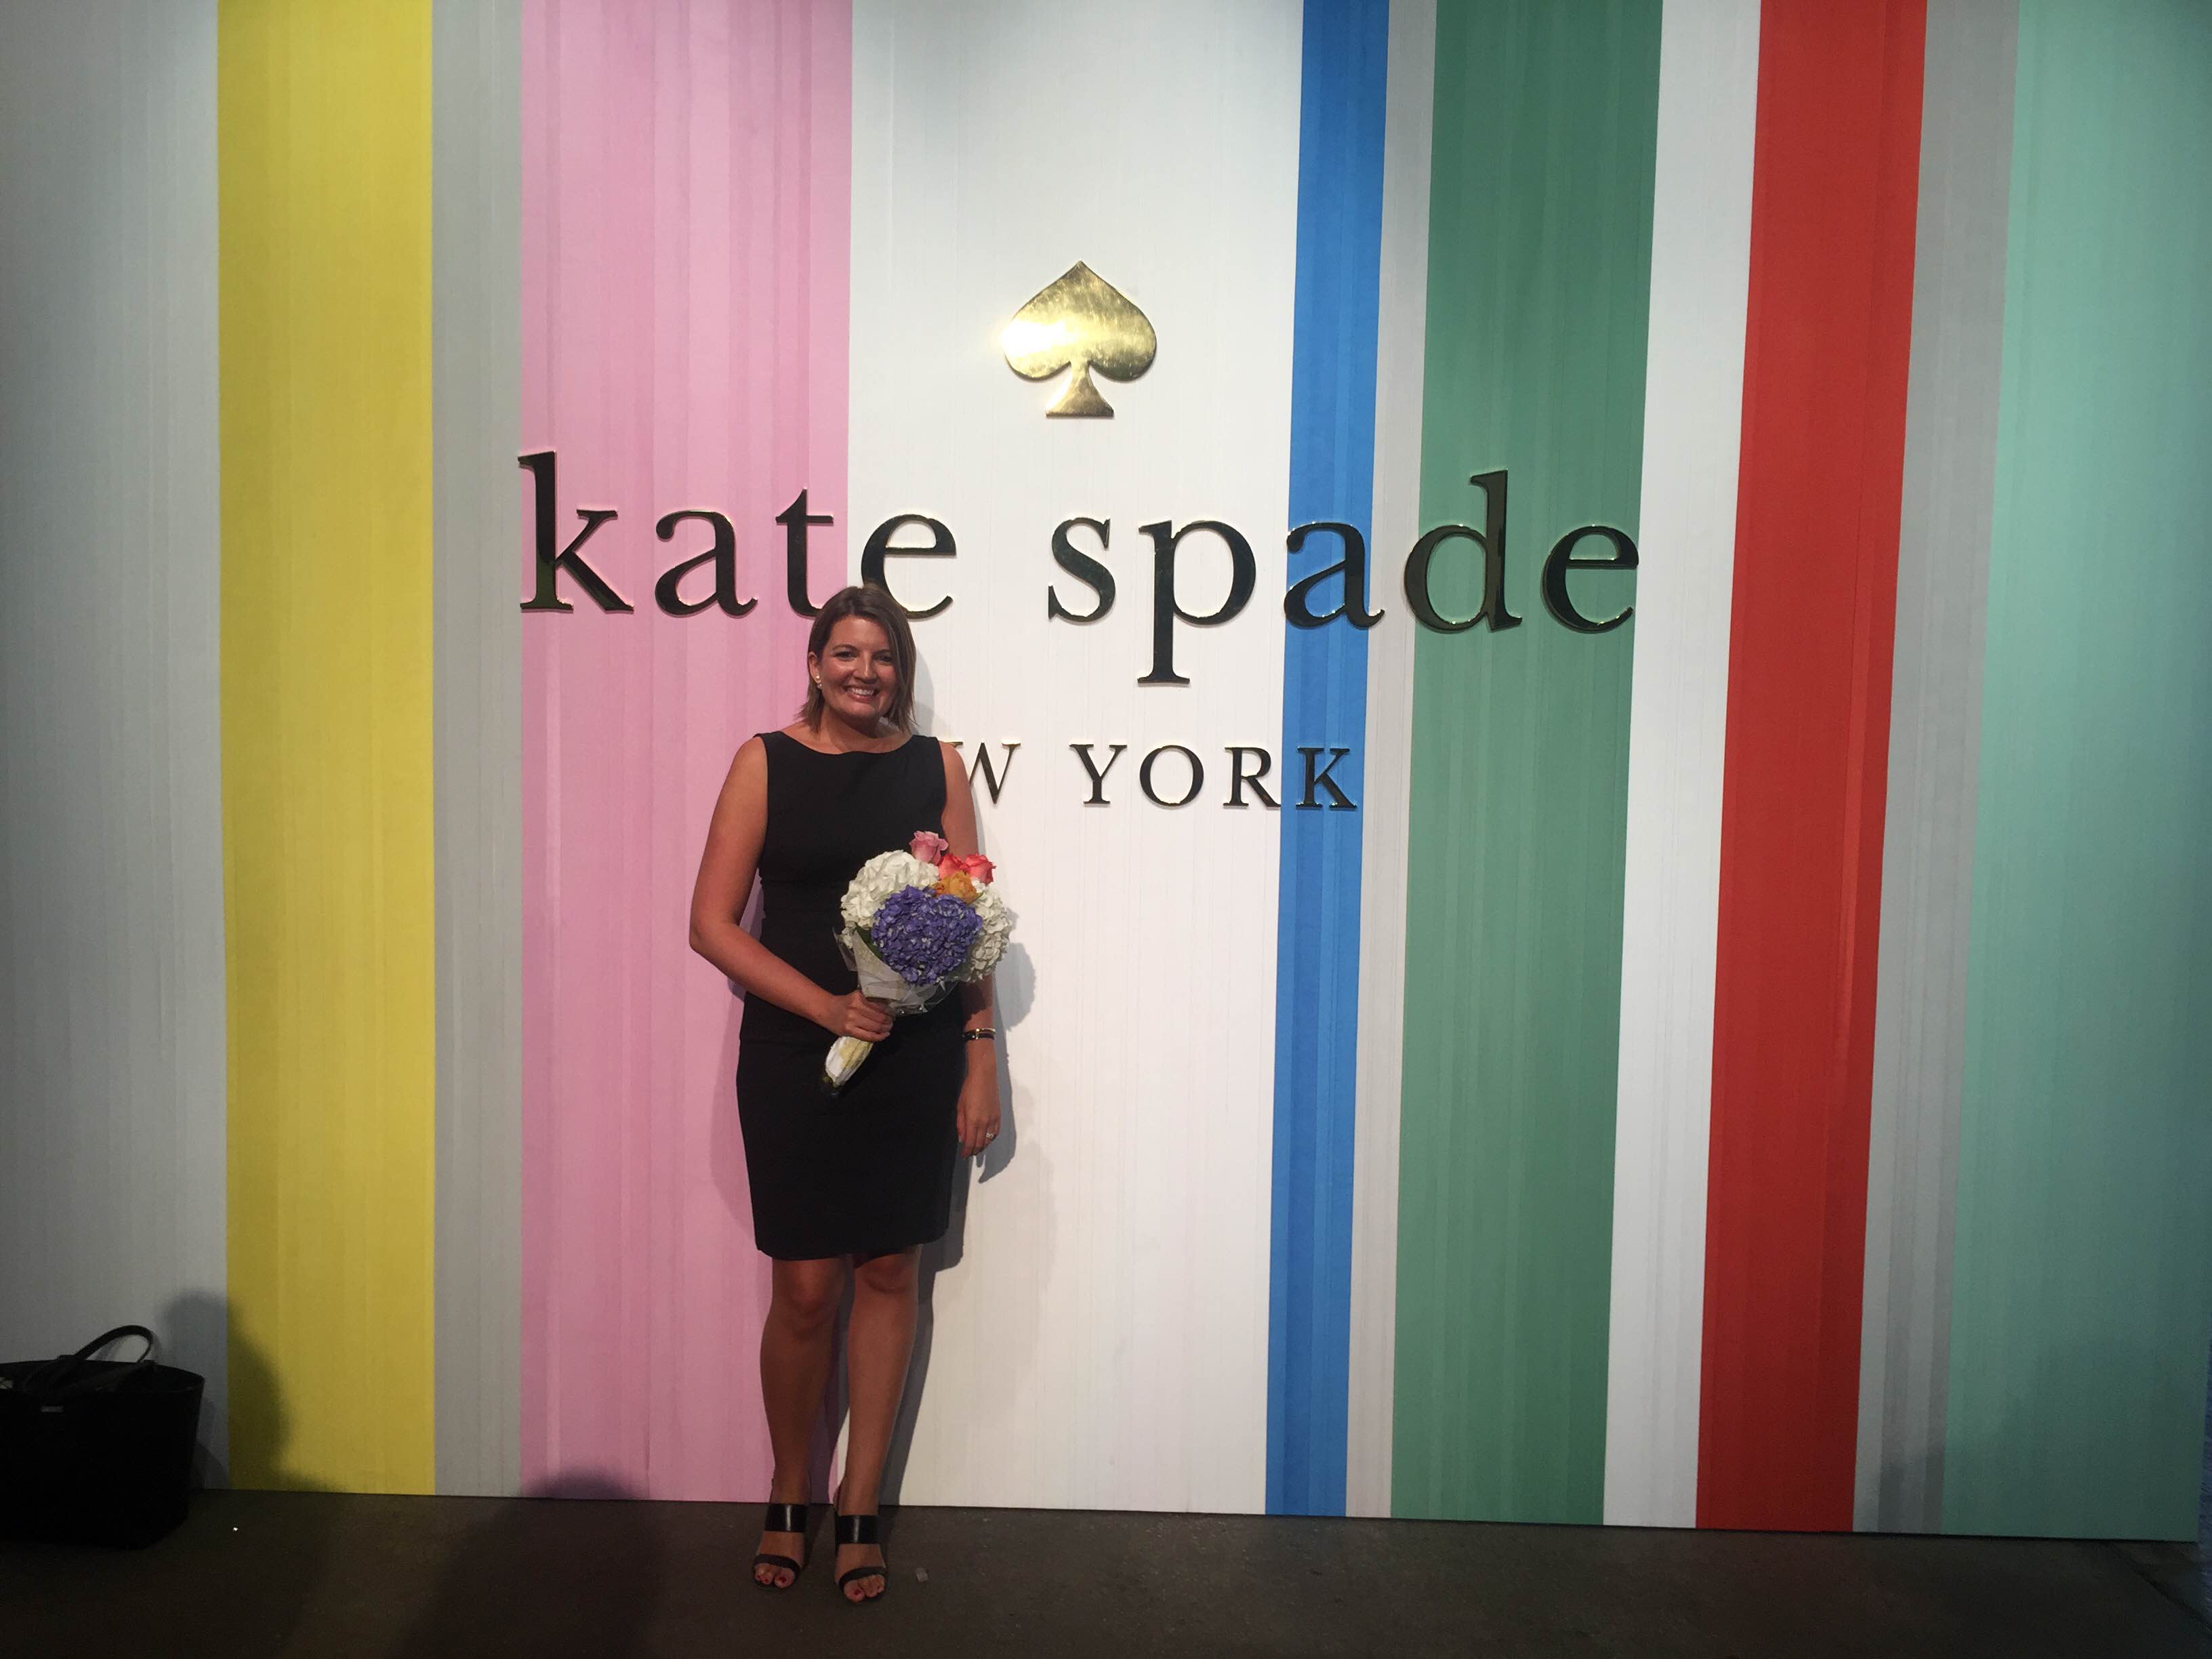 Mallory Kohlmeyer poses at Kate Spade event